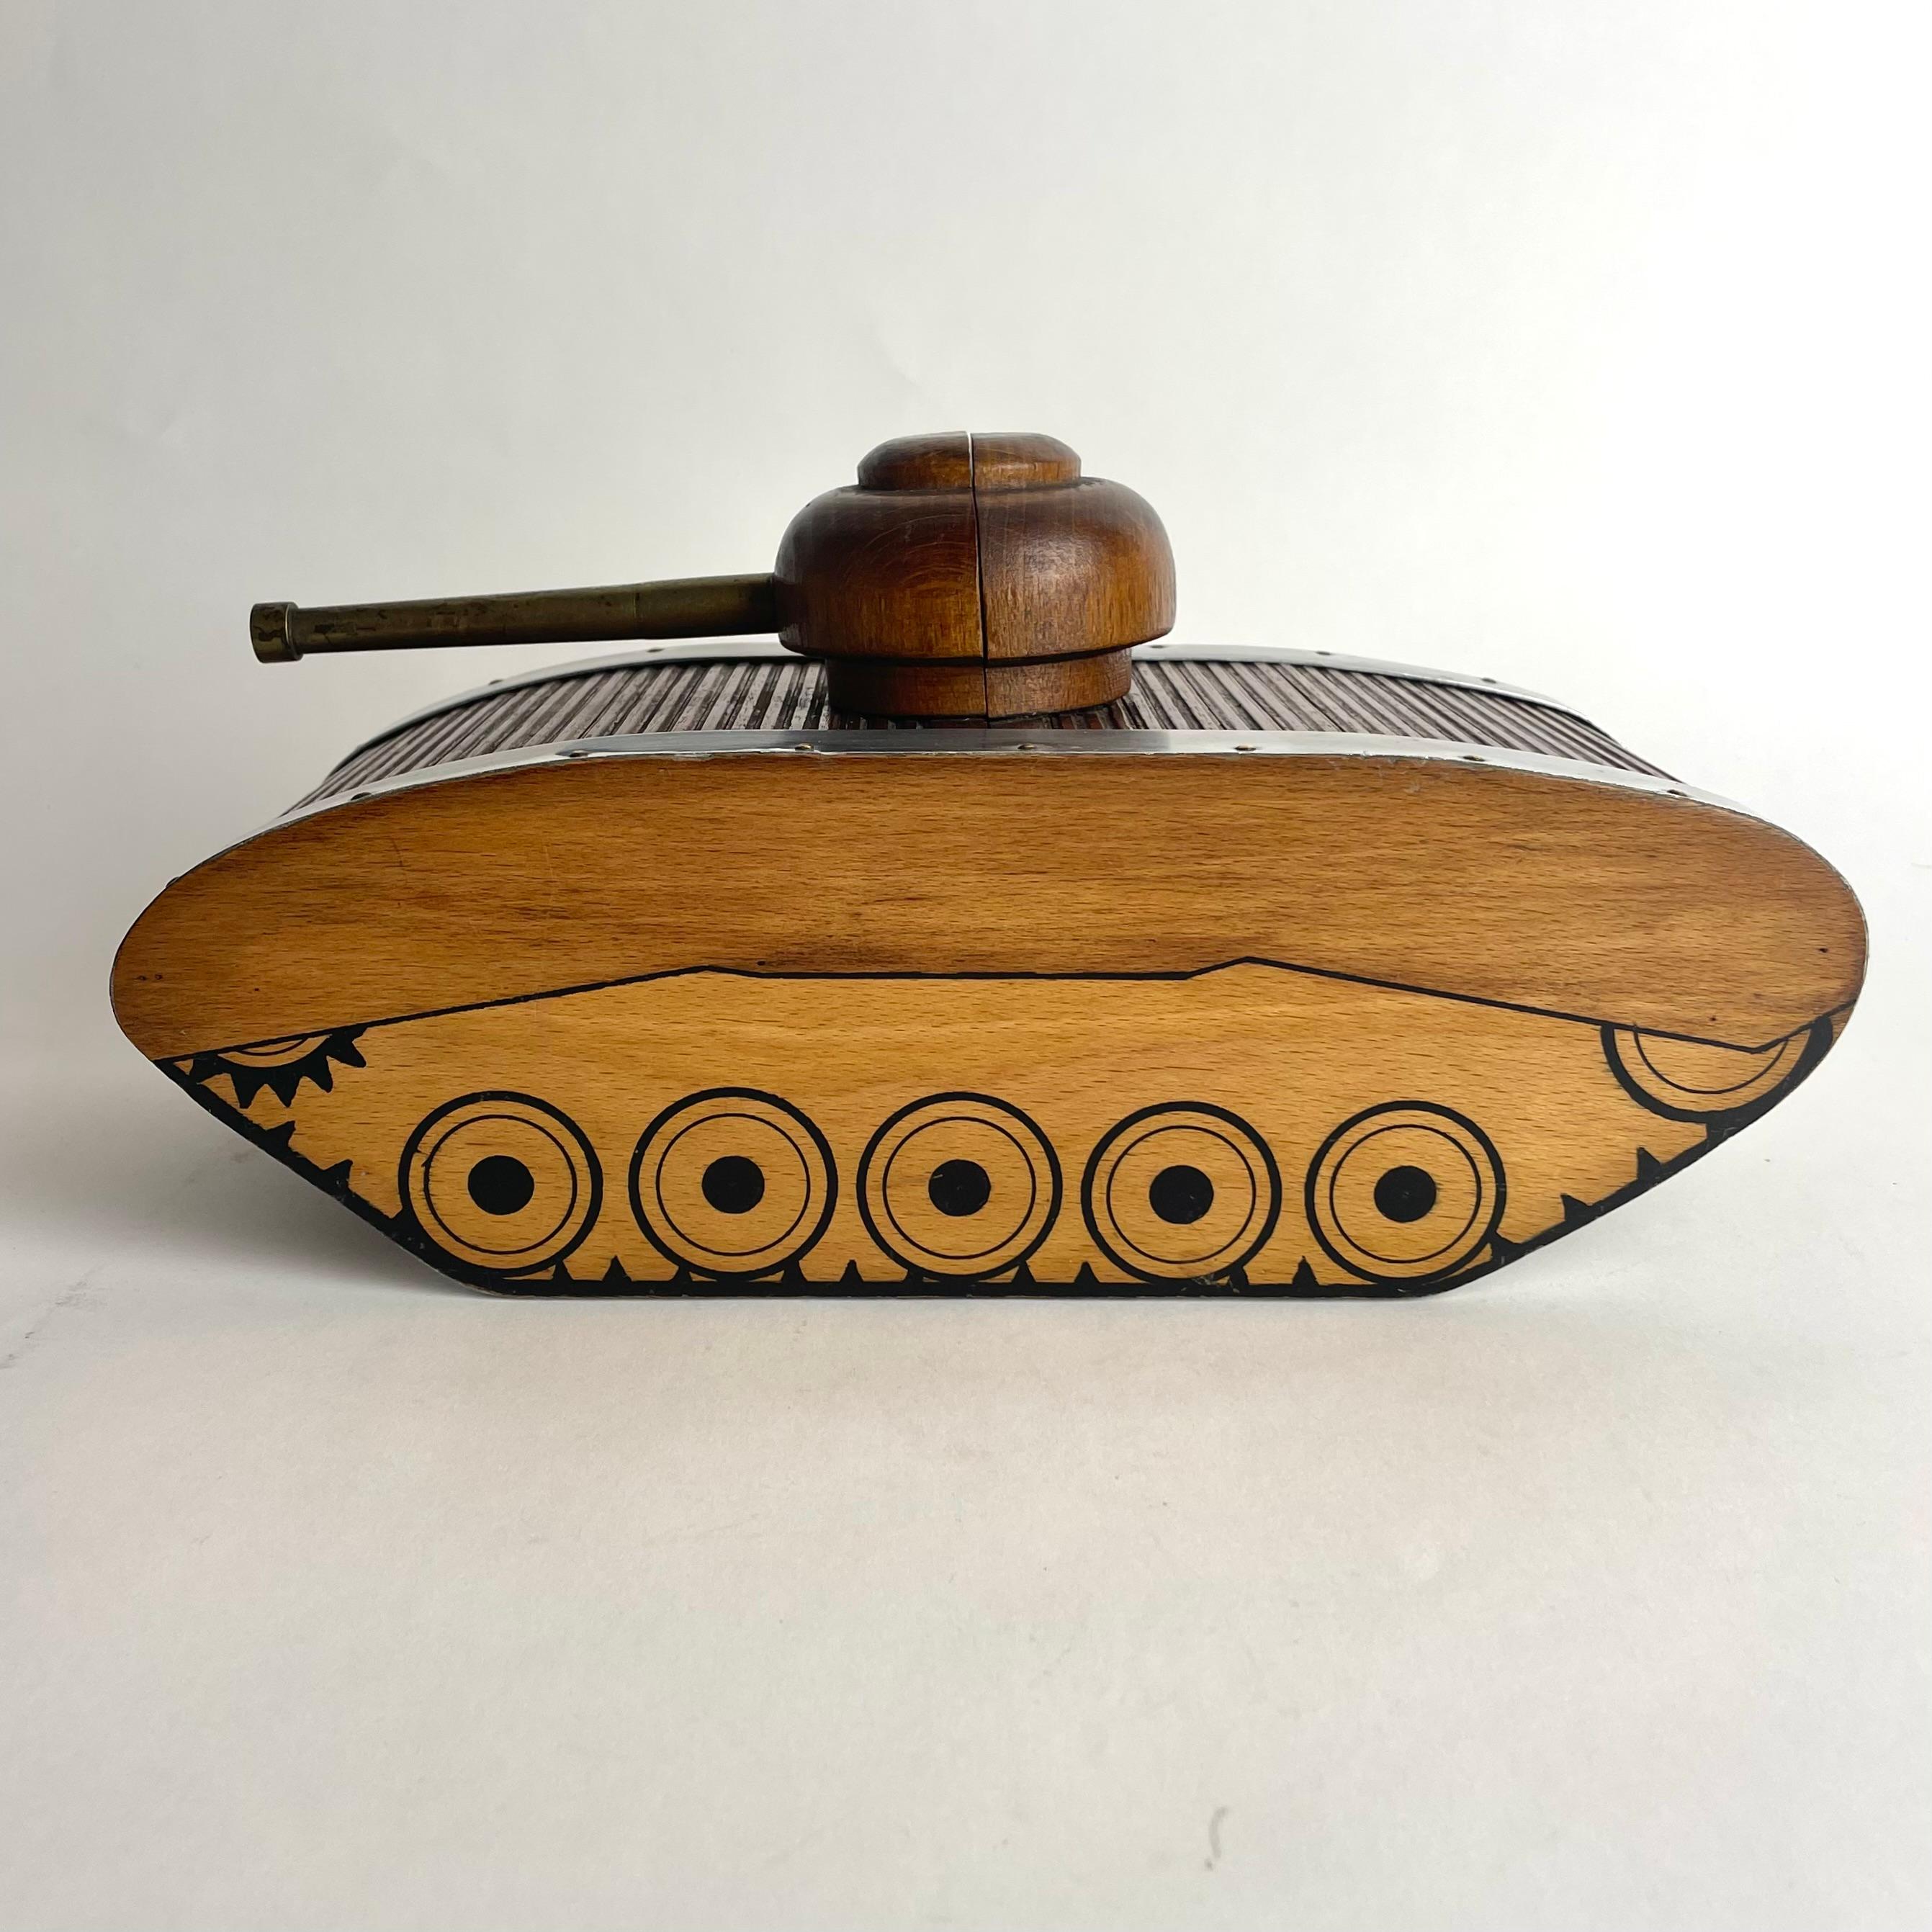 European Decorative Cigar or Cigarette Box in the shape of a tank from the 1940s For Sale